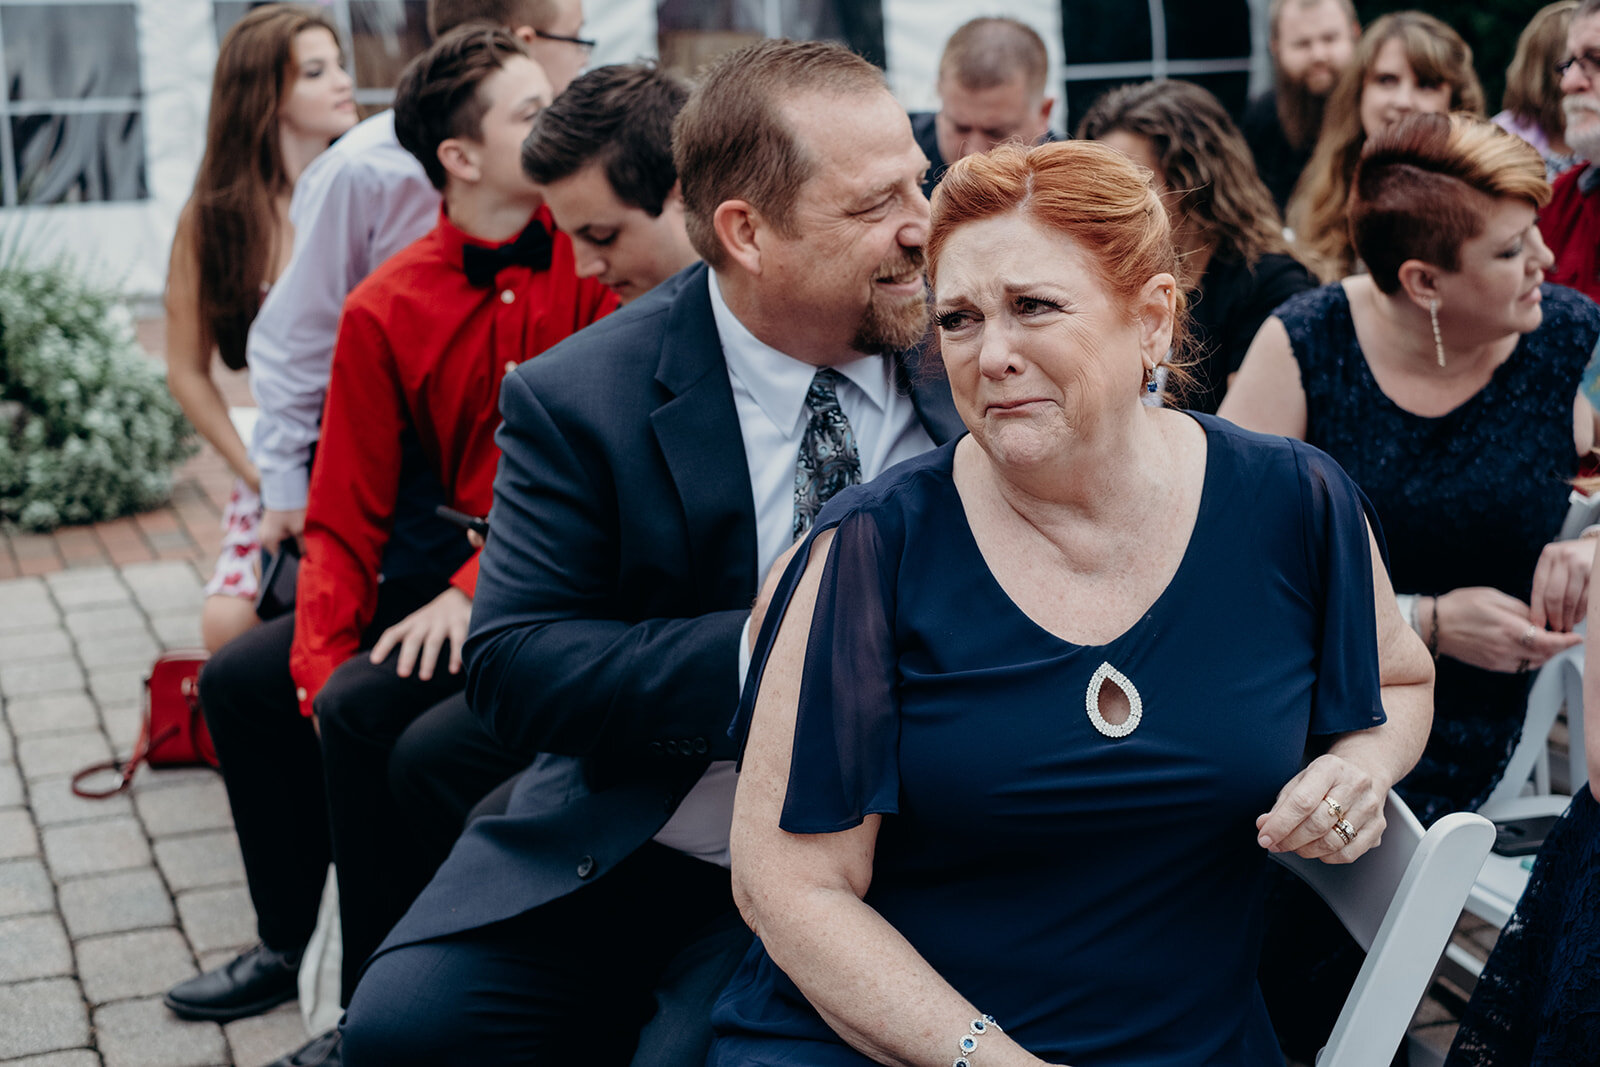 The mother of the groom gets teary eyed as she looks at her son standing ready to get married at the Birkby House in Leesburg, VA.